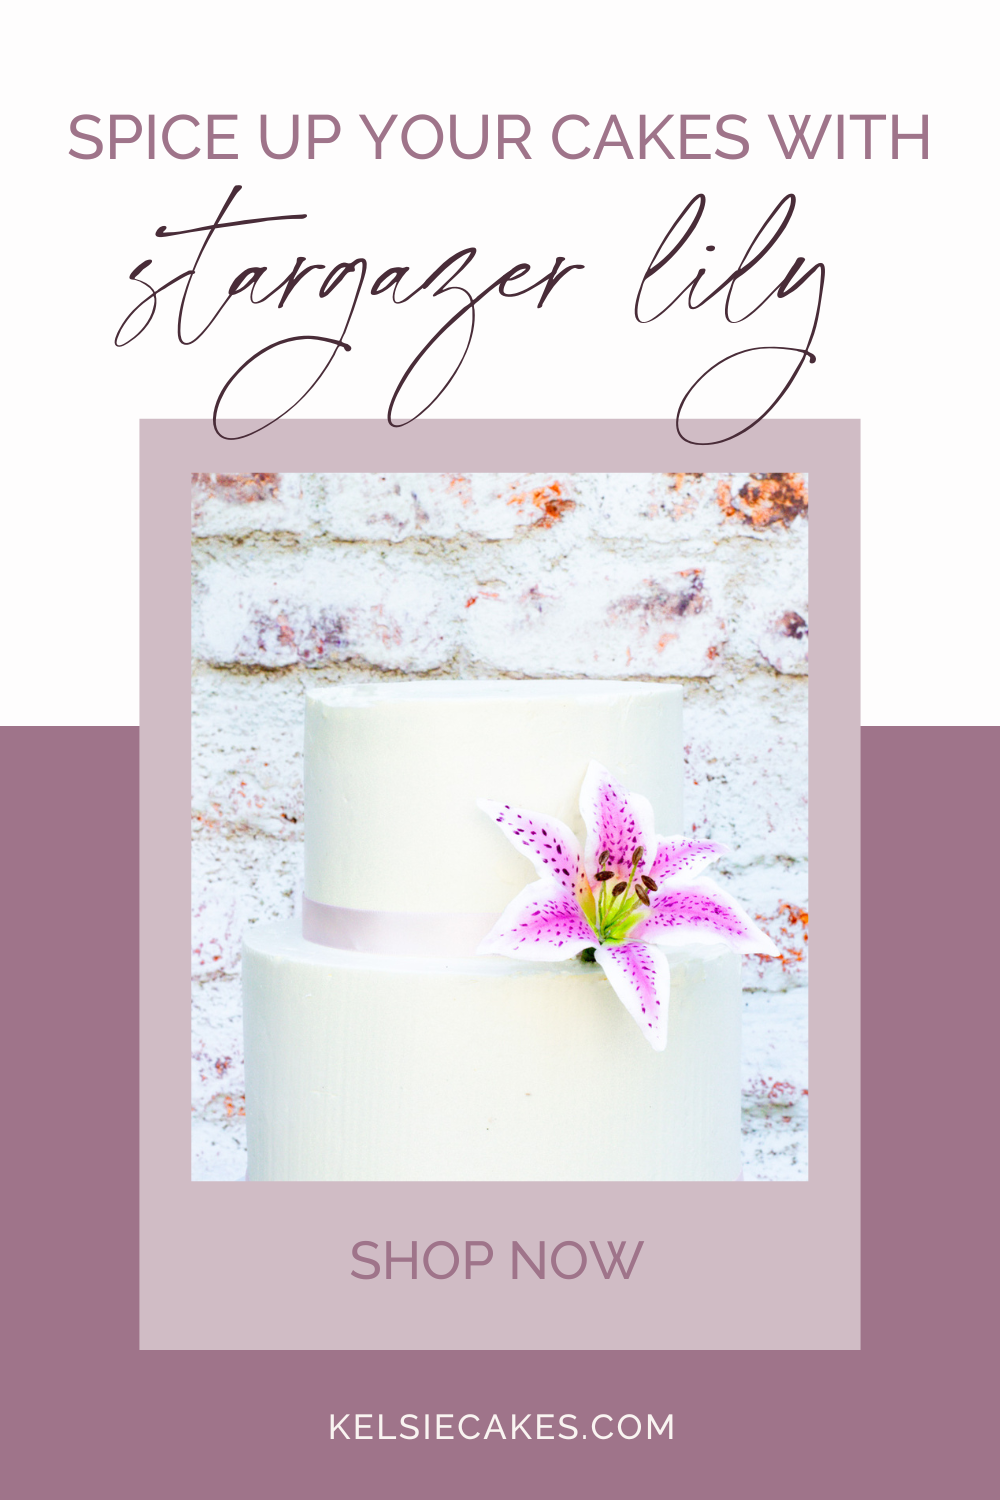 Spice Up Your Cakes with Stargazer Lily by Kelsie Cakes